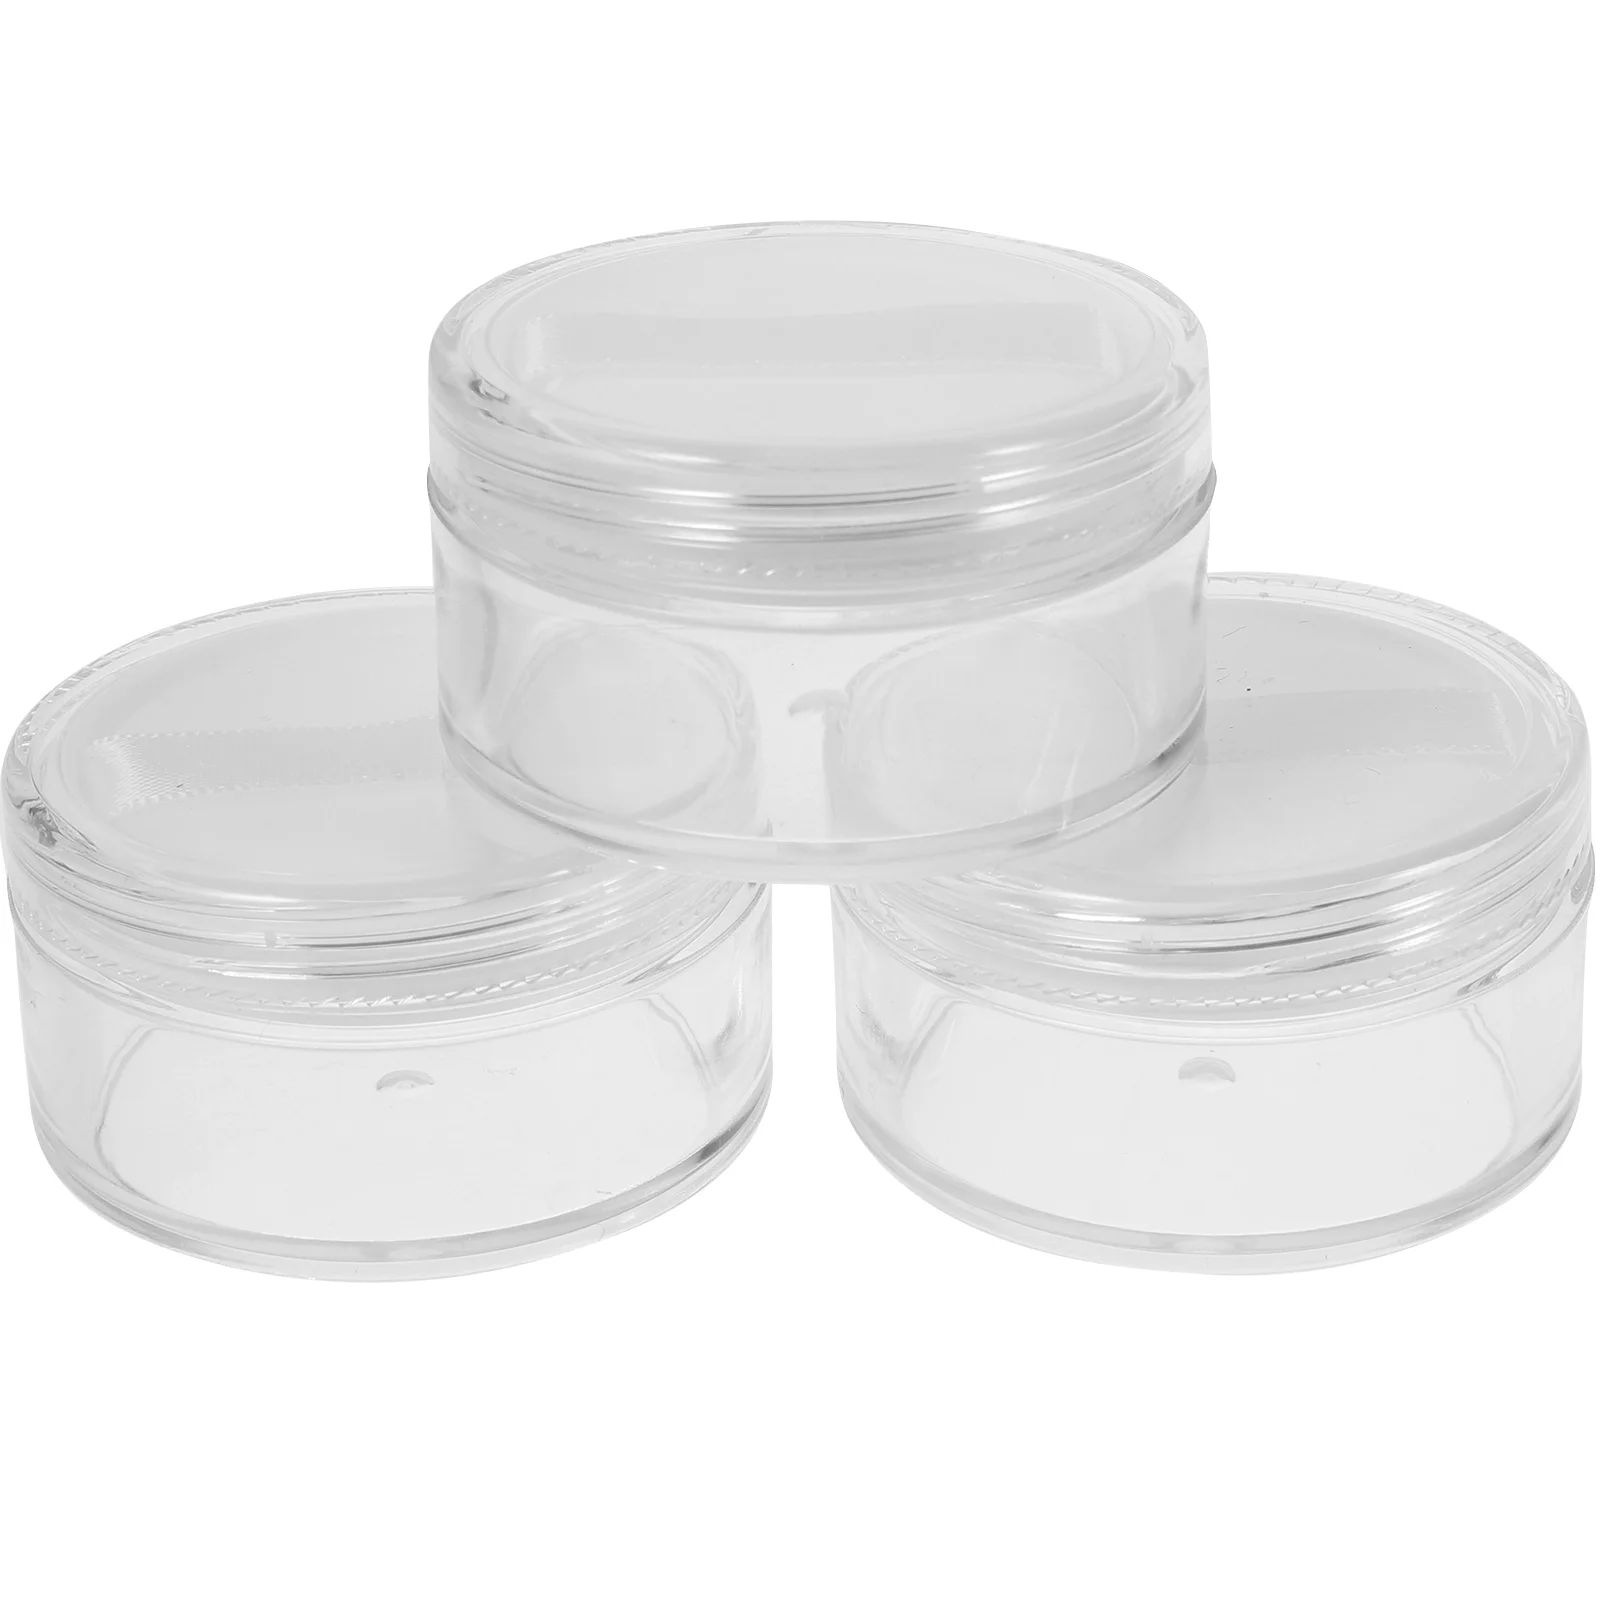 

3Pcs Empty Loose Powder Case, Portable Makeup Powder Bottles Subpackage Travelling Bottle with Puff for ( 20g )